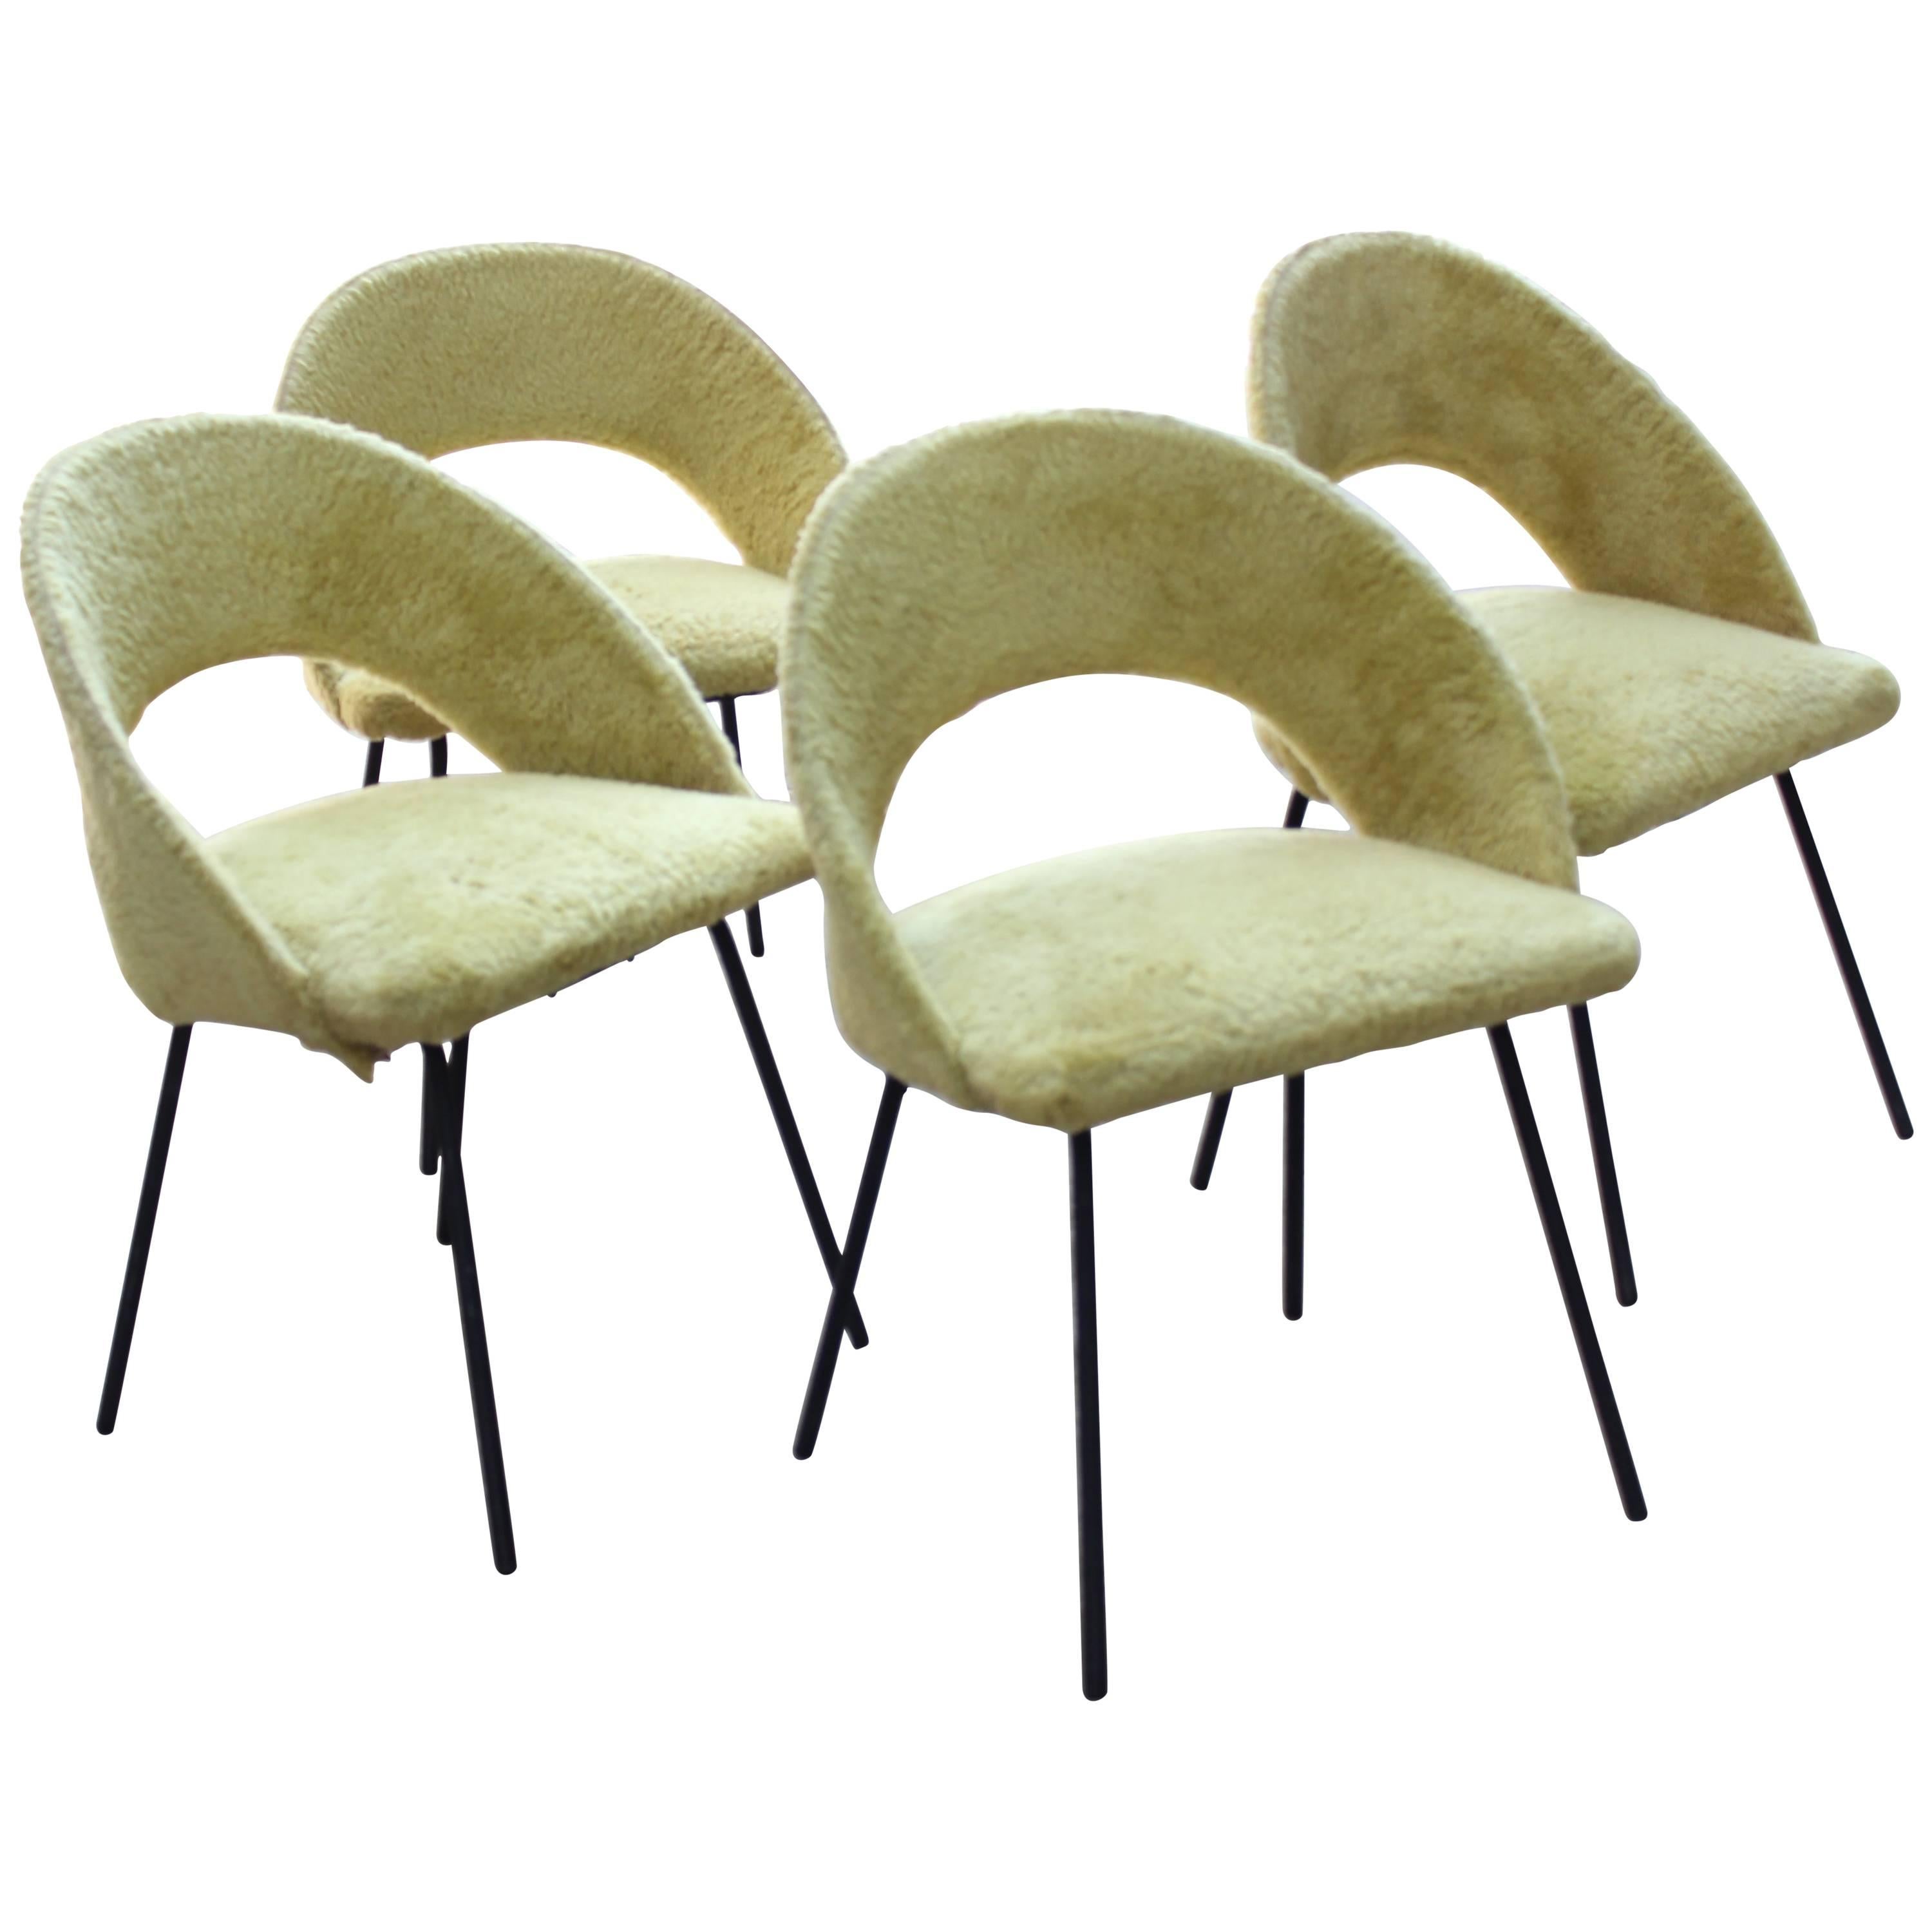 Set of Four French 1950s Chairs in Original Fleece For Sale